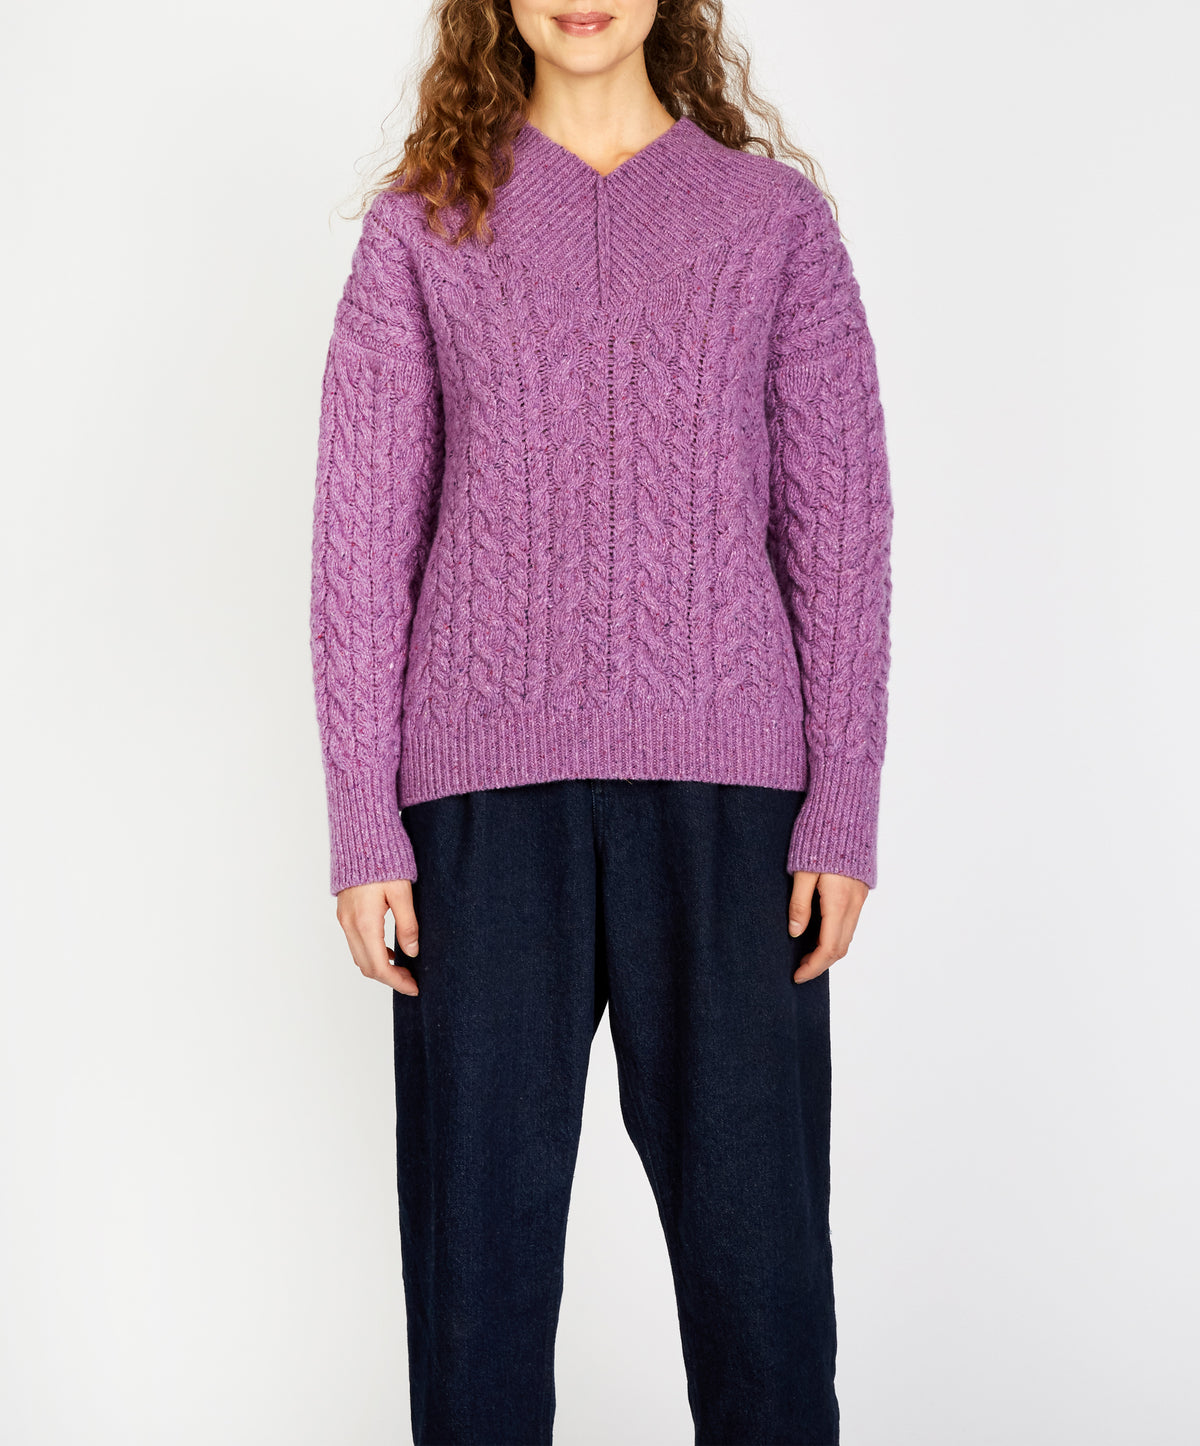 IrelandsEye Knitwear Mill Lane Cable V-Neck Sweater Orchid